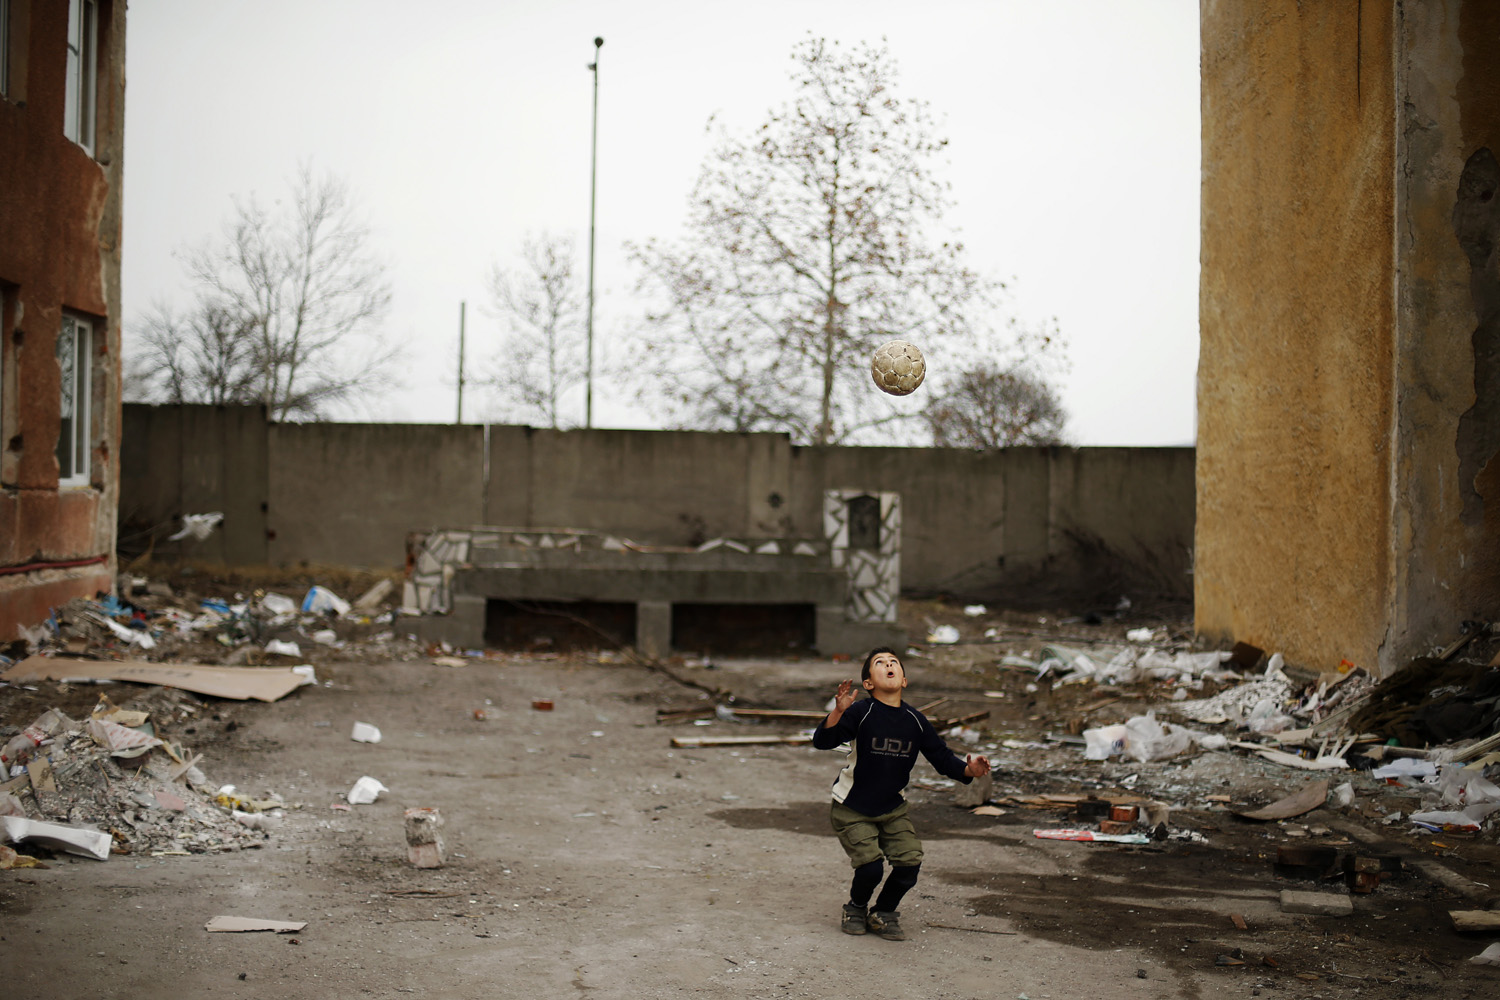 Jan. 21, 2014. A Syrian refugee boy plays with a ball at a refugee centre in the town of Harmanli, some 250 km (155 miles) southeast of Sofia, Bulgaria.